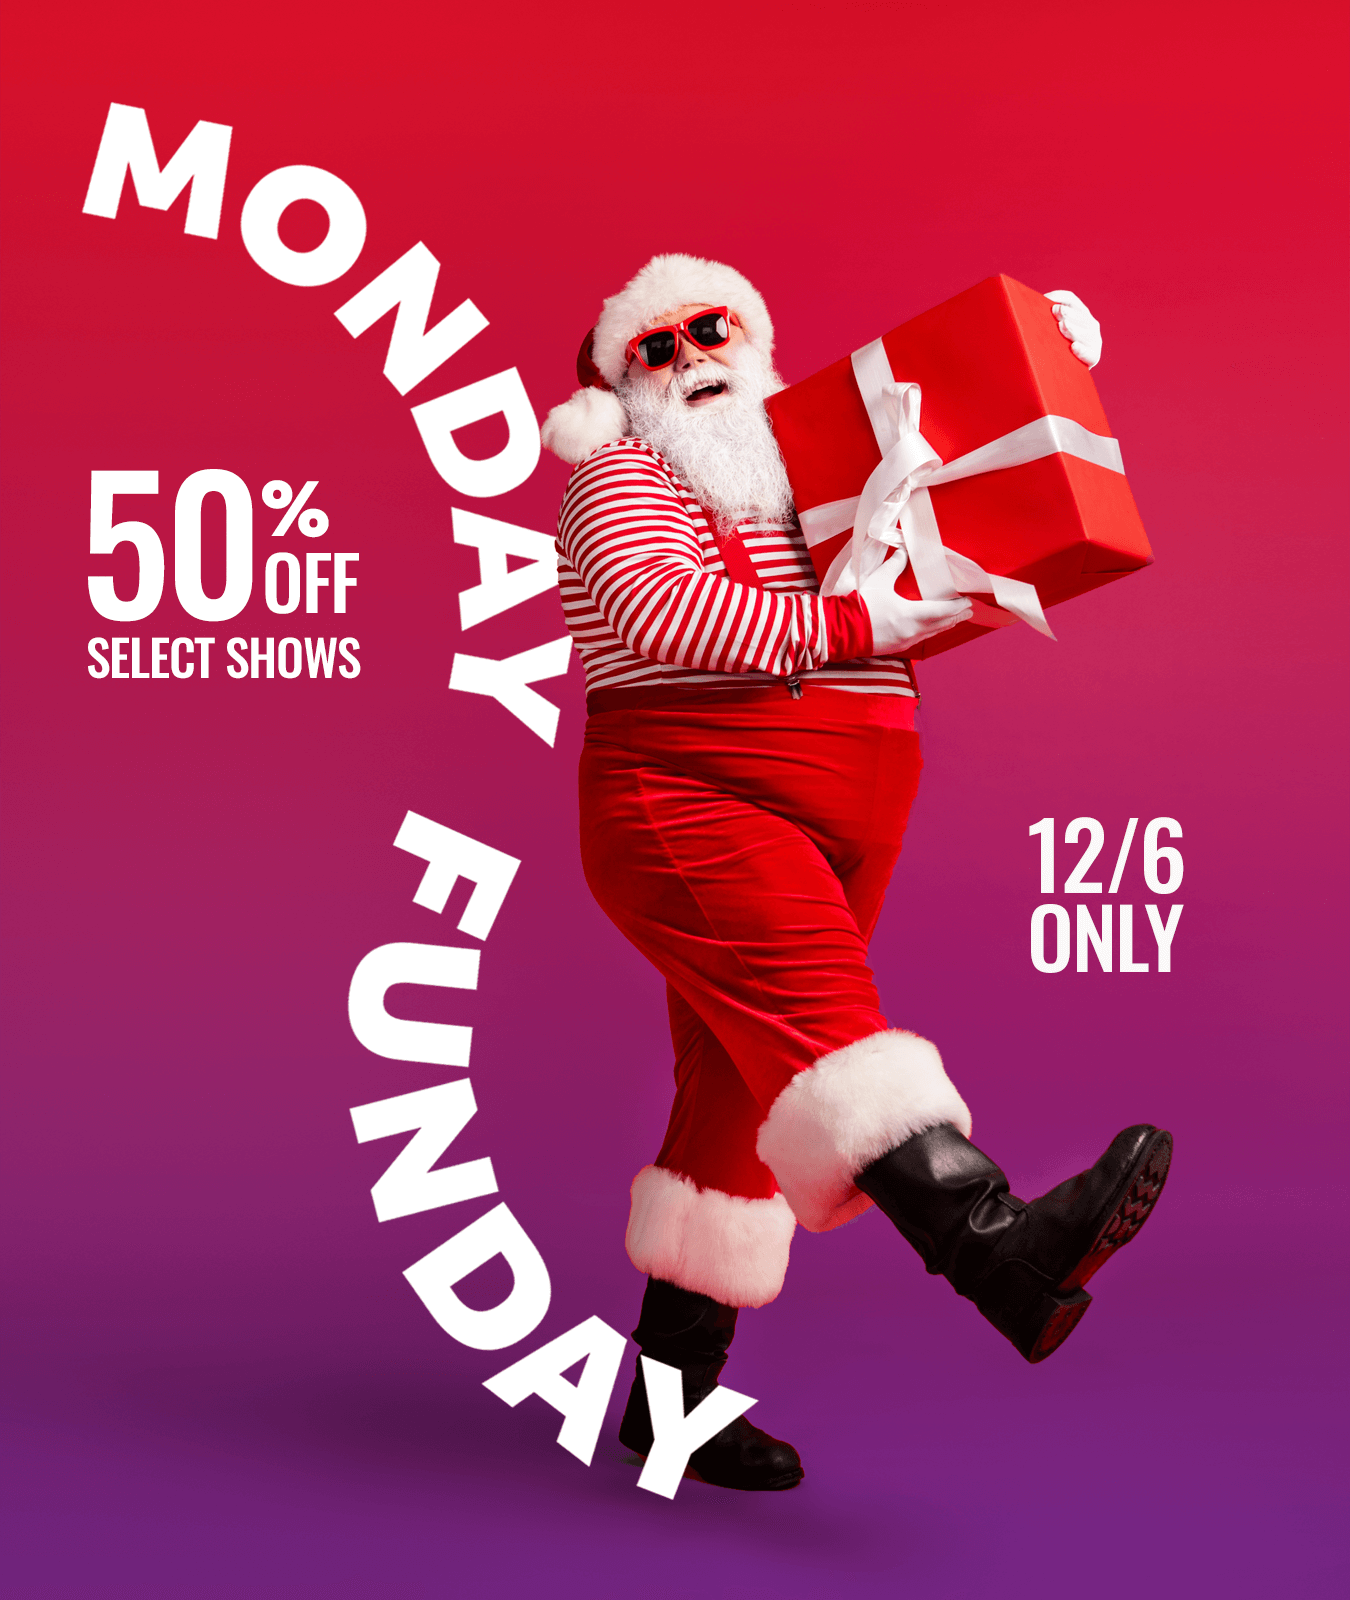 Monday Funday 50% off select shows 12/6 only with Santa holding a gift